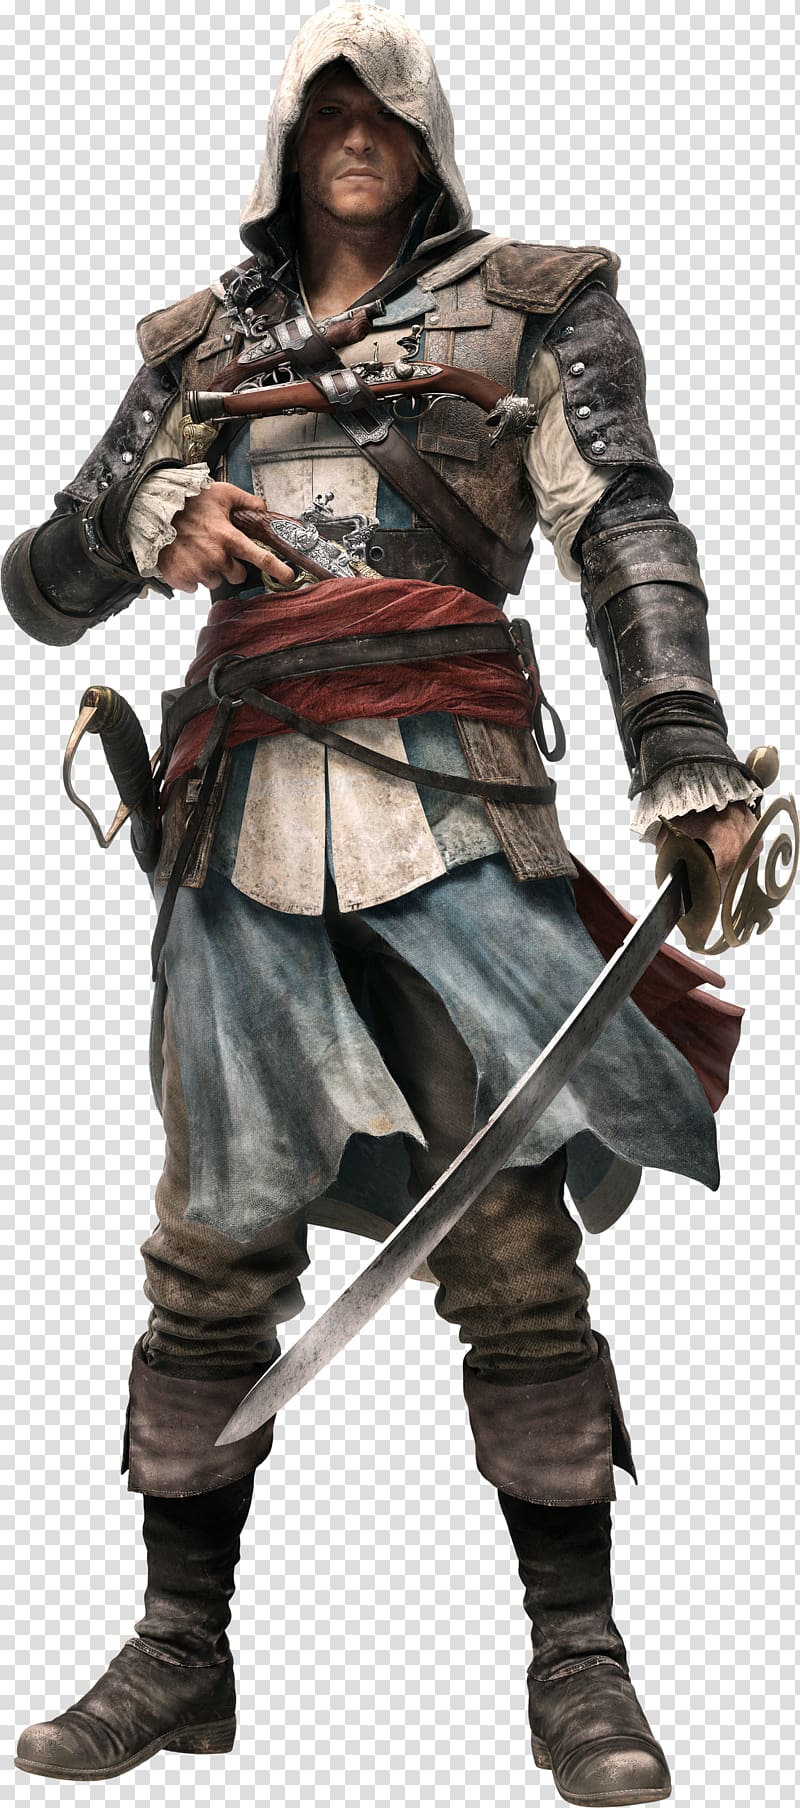 Assassin's Creed IV: Black Flag Assassin's Creed III Assassin's Creed Unity Black Flag: Assassin's Creed Assassin's Creed Rogue, others transparent background PNG clipart